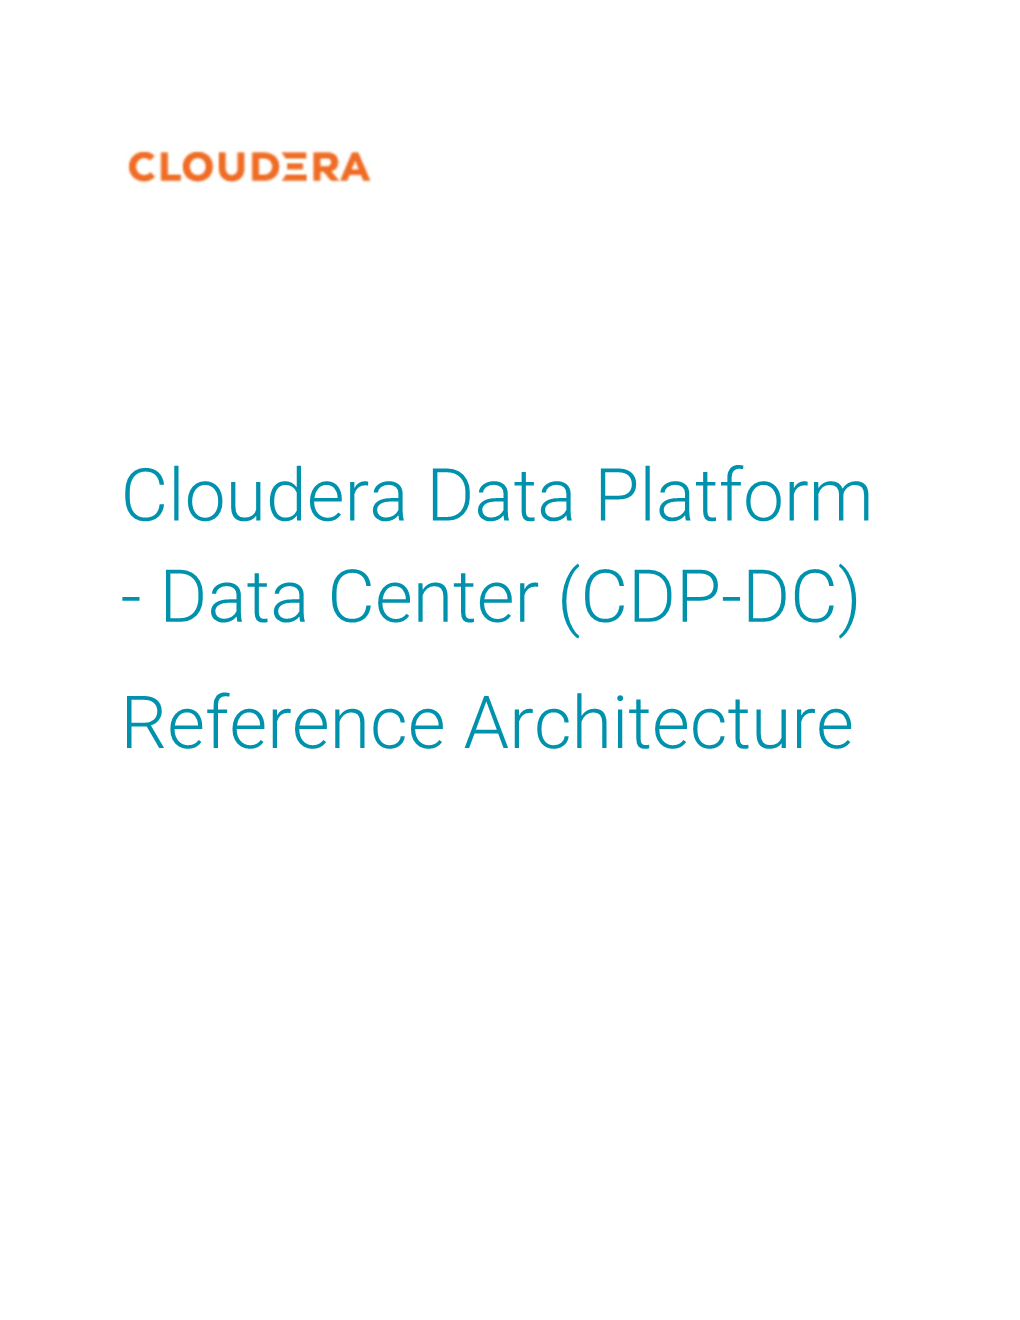 Data Center (CDP-DC) Reference Architecture